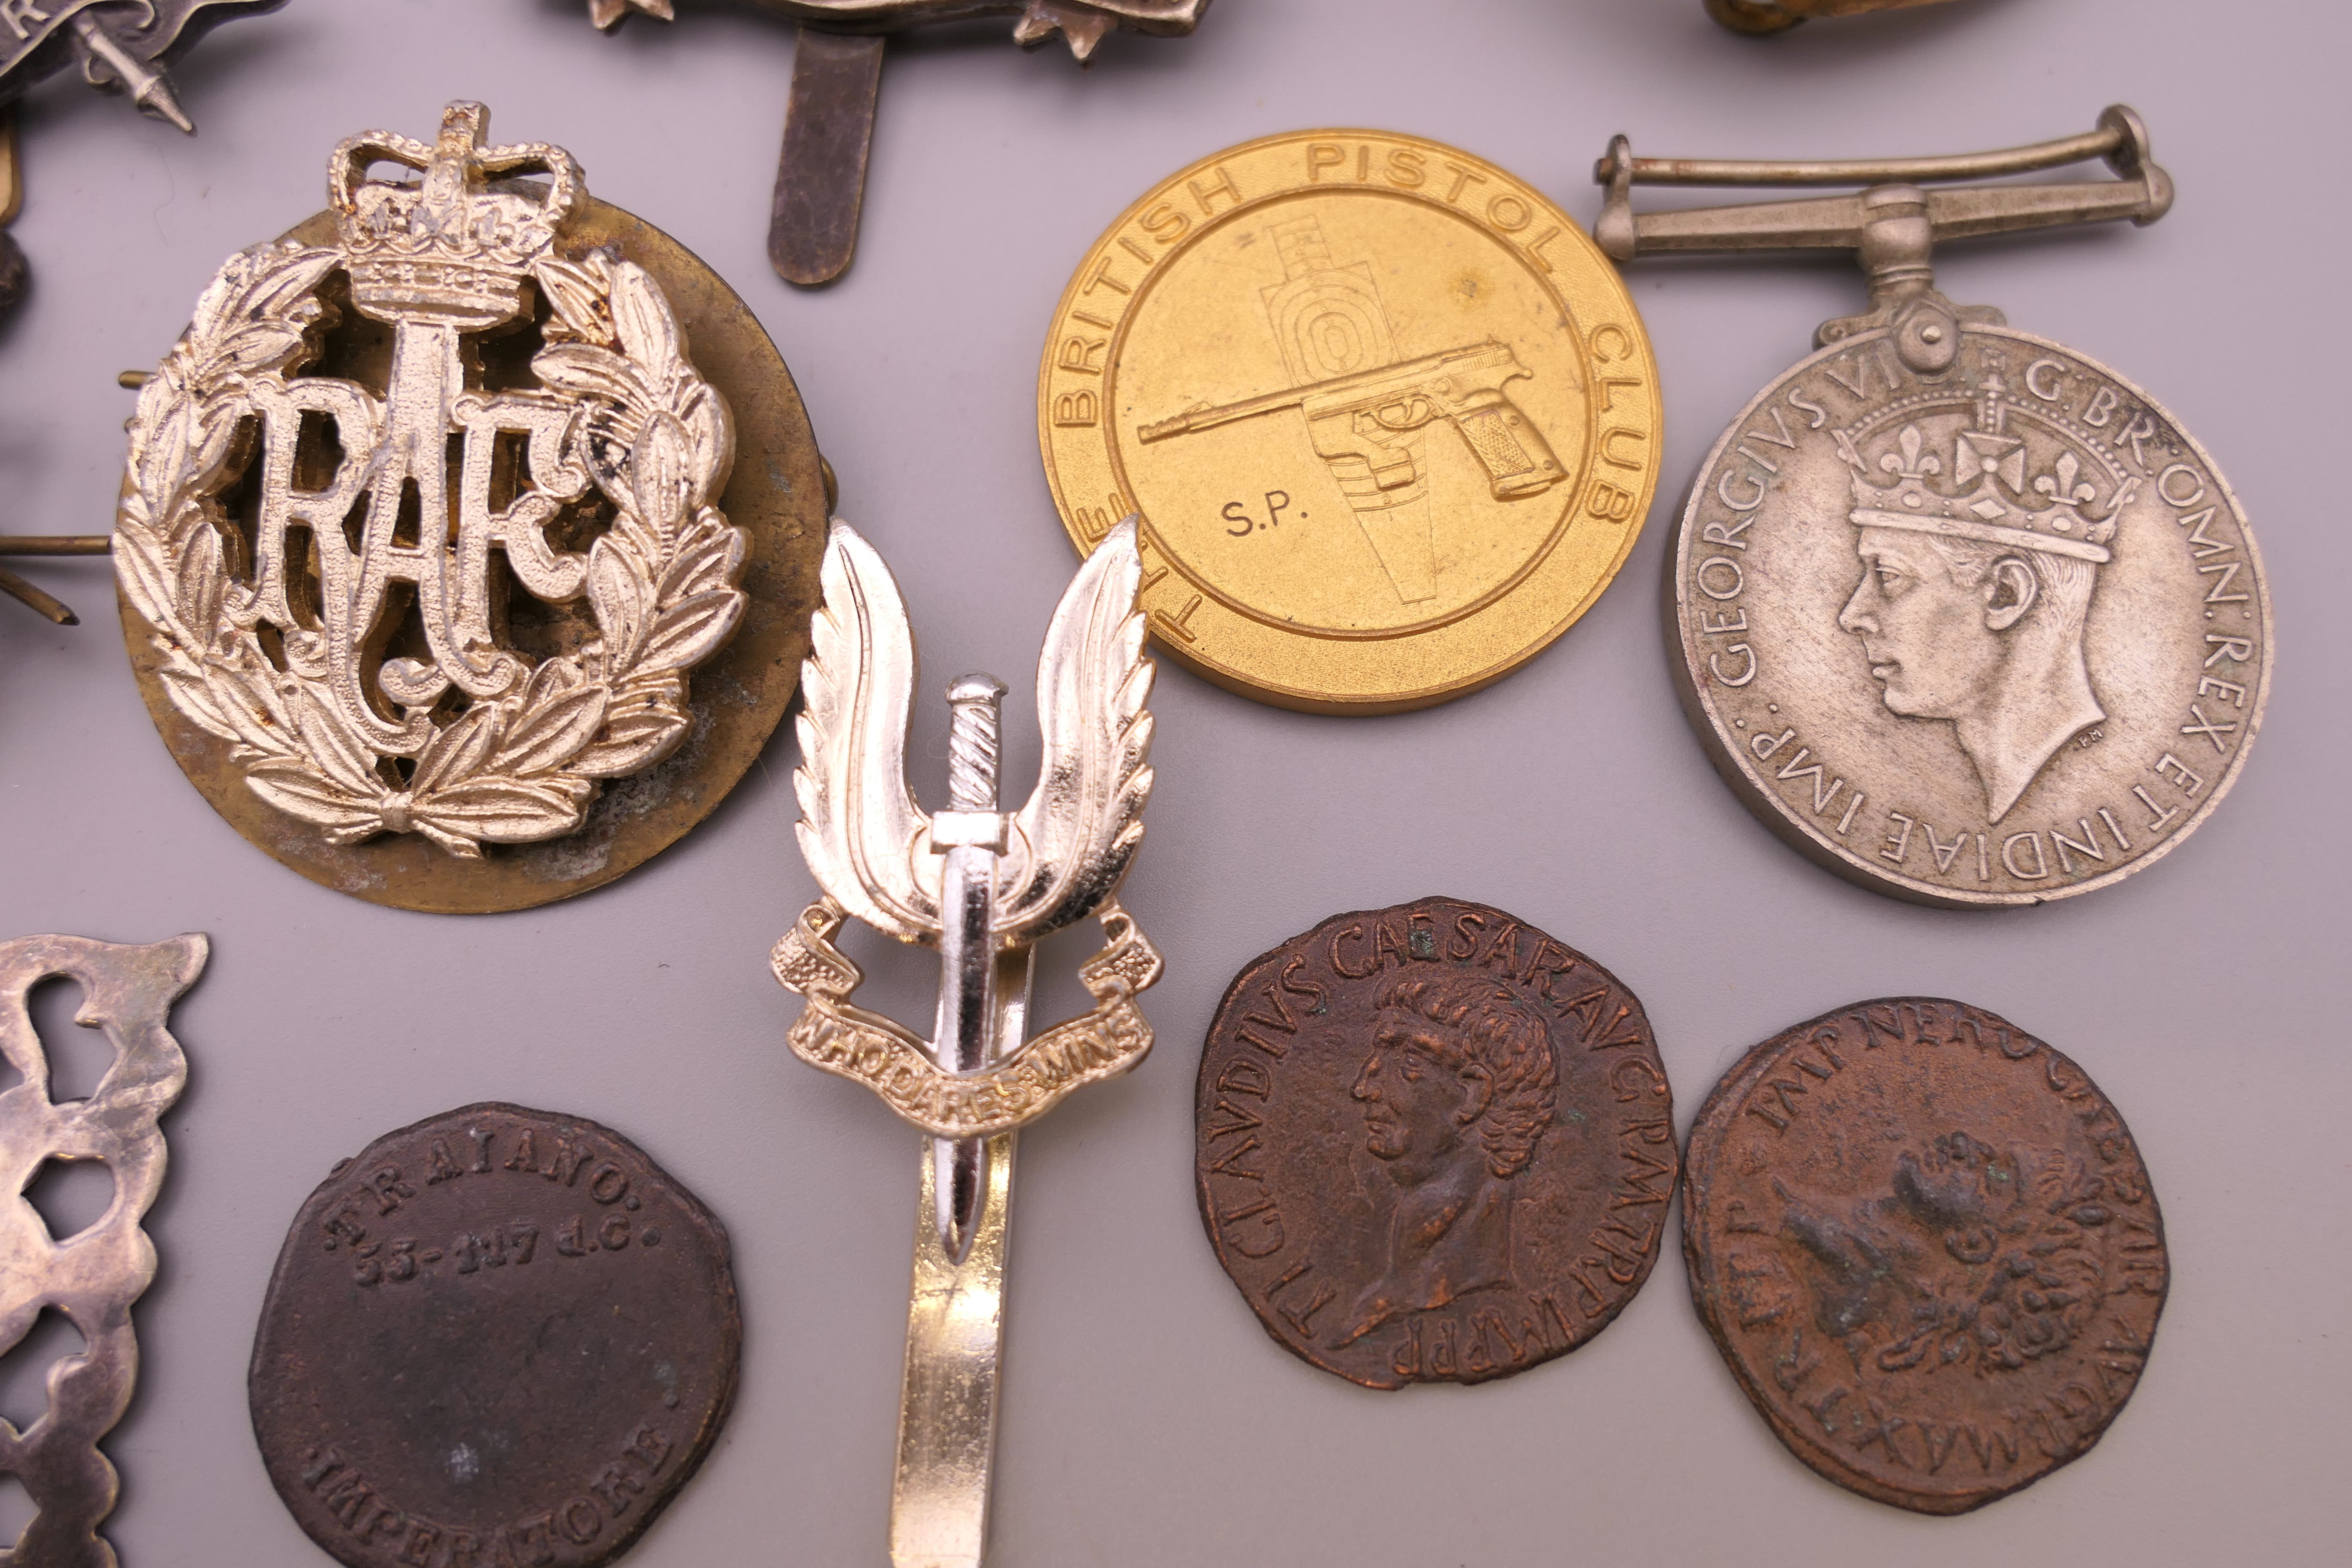 A quantity of various military medals, cap badges, coins, etc. - Image 4 of 9